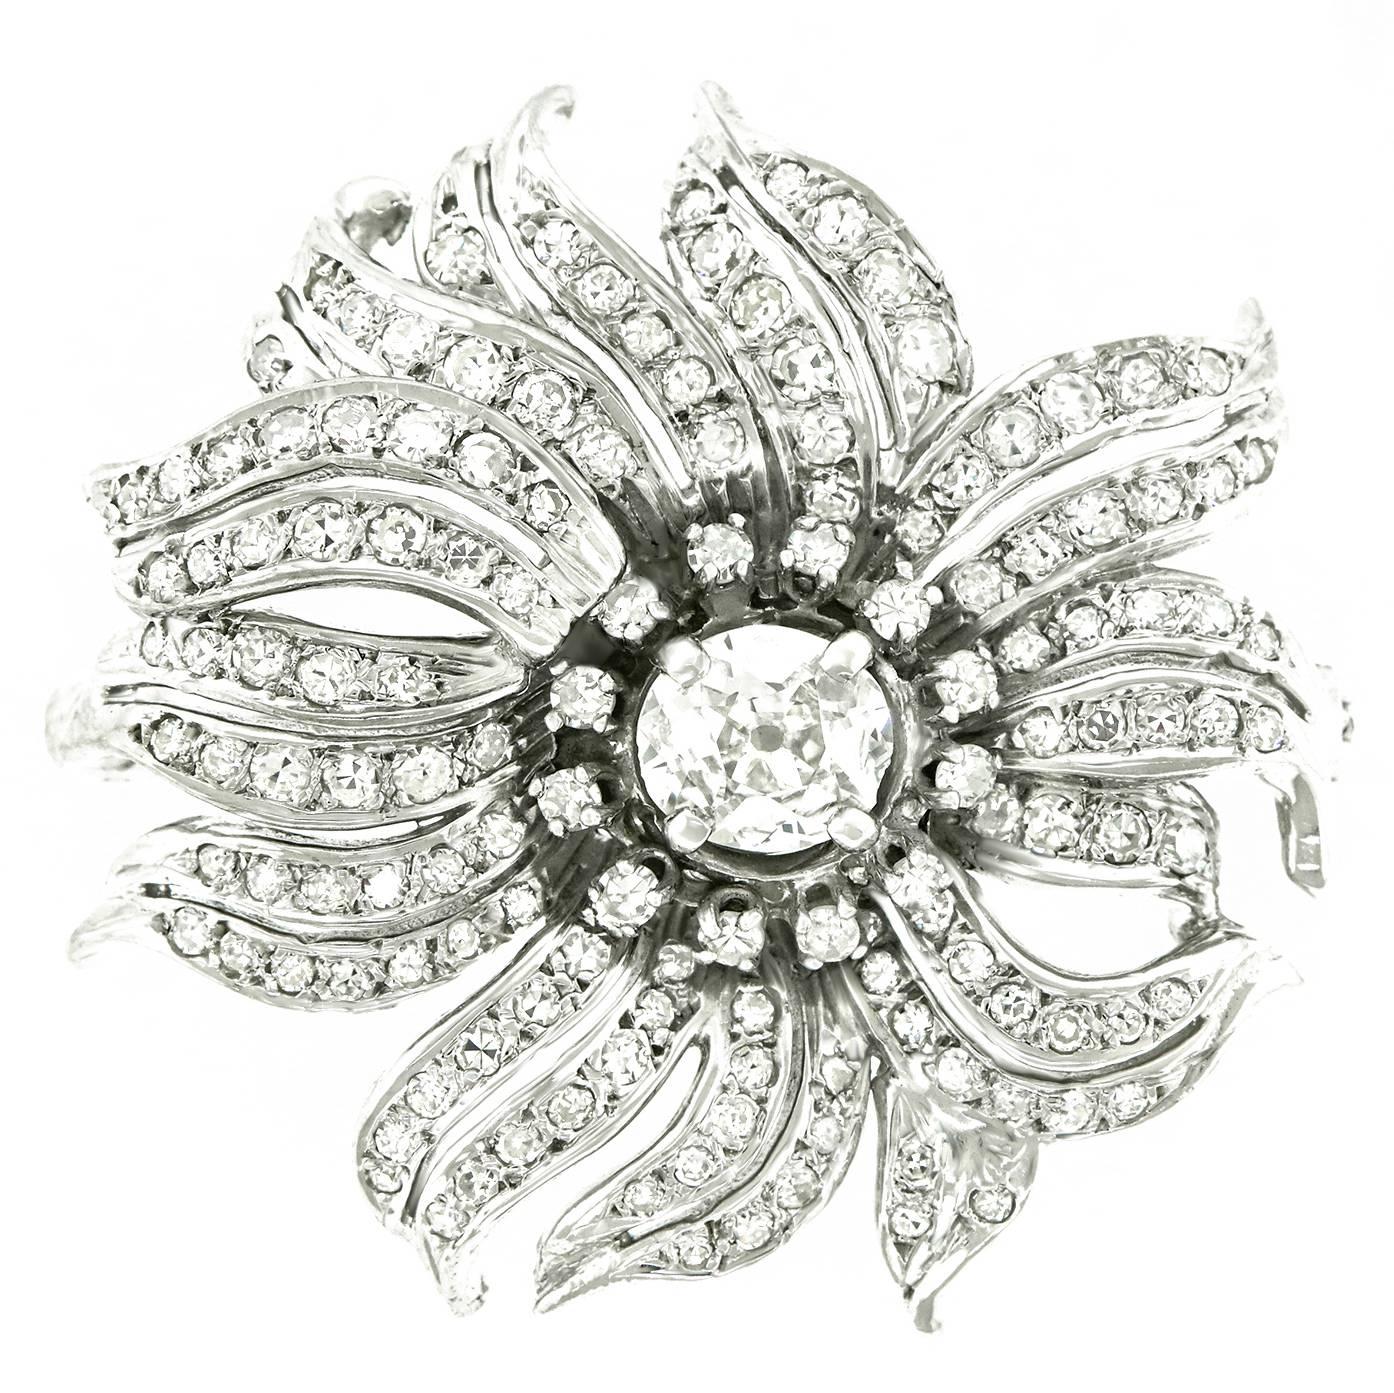 Circa 1920s, 14k, American.  This stunning Art Deco flower brooch features diamond-set petals centered by a .67 carat center stone, for a total of 2.78 carats of brilliant diamonds (H-I color, SI1-2 clarity).  Perfect on a suit, cocktail dress, or